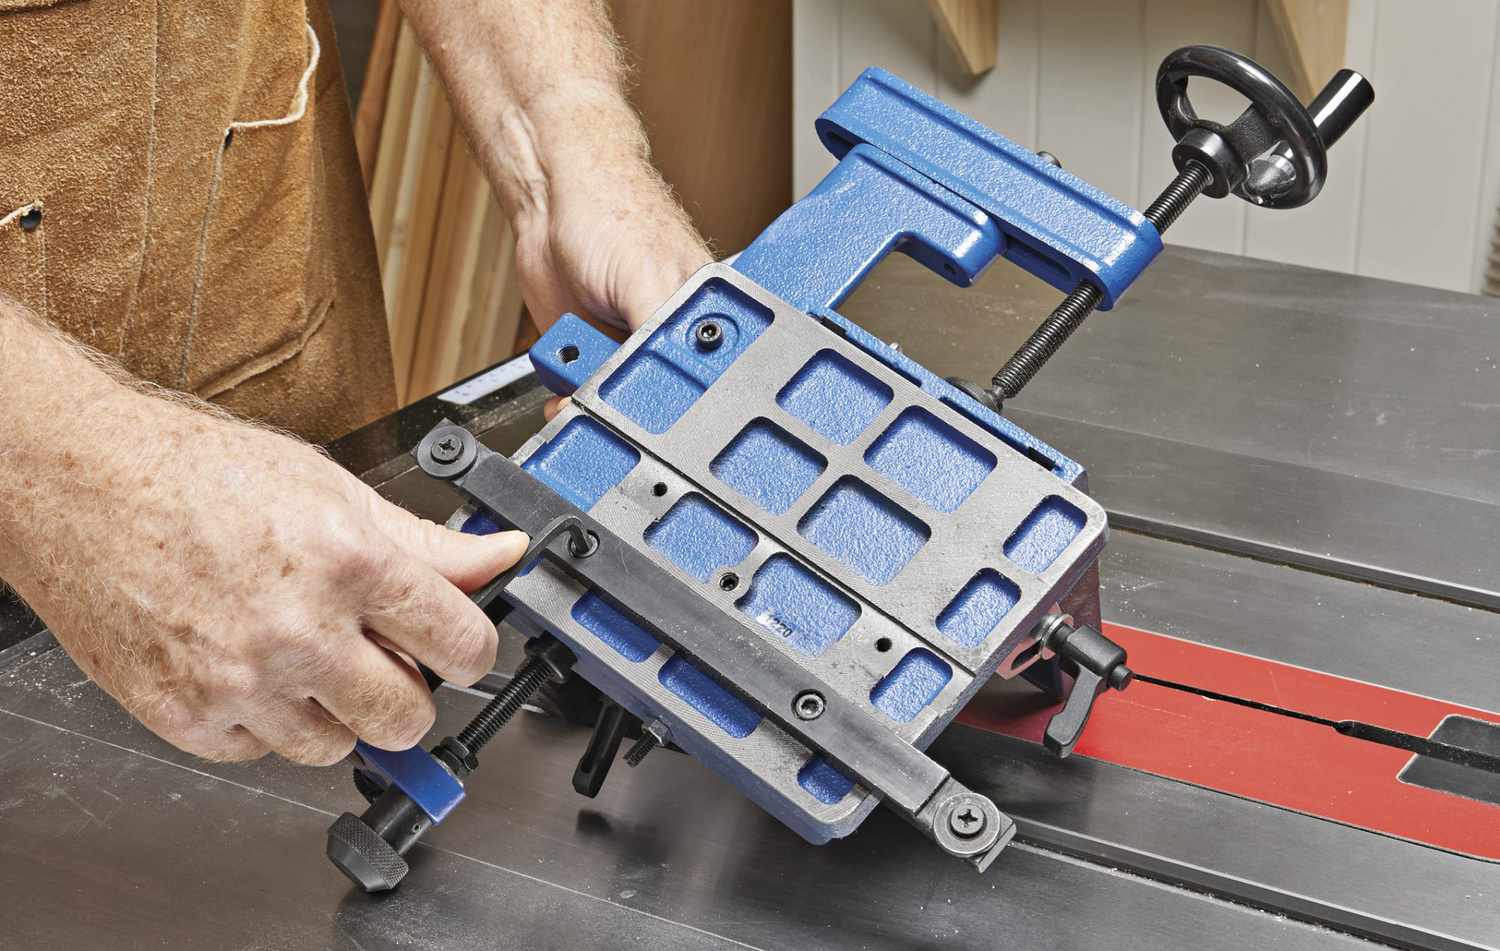 Phot of accessible miter bars on jig